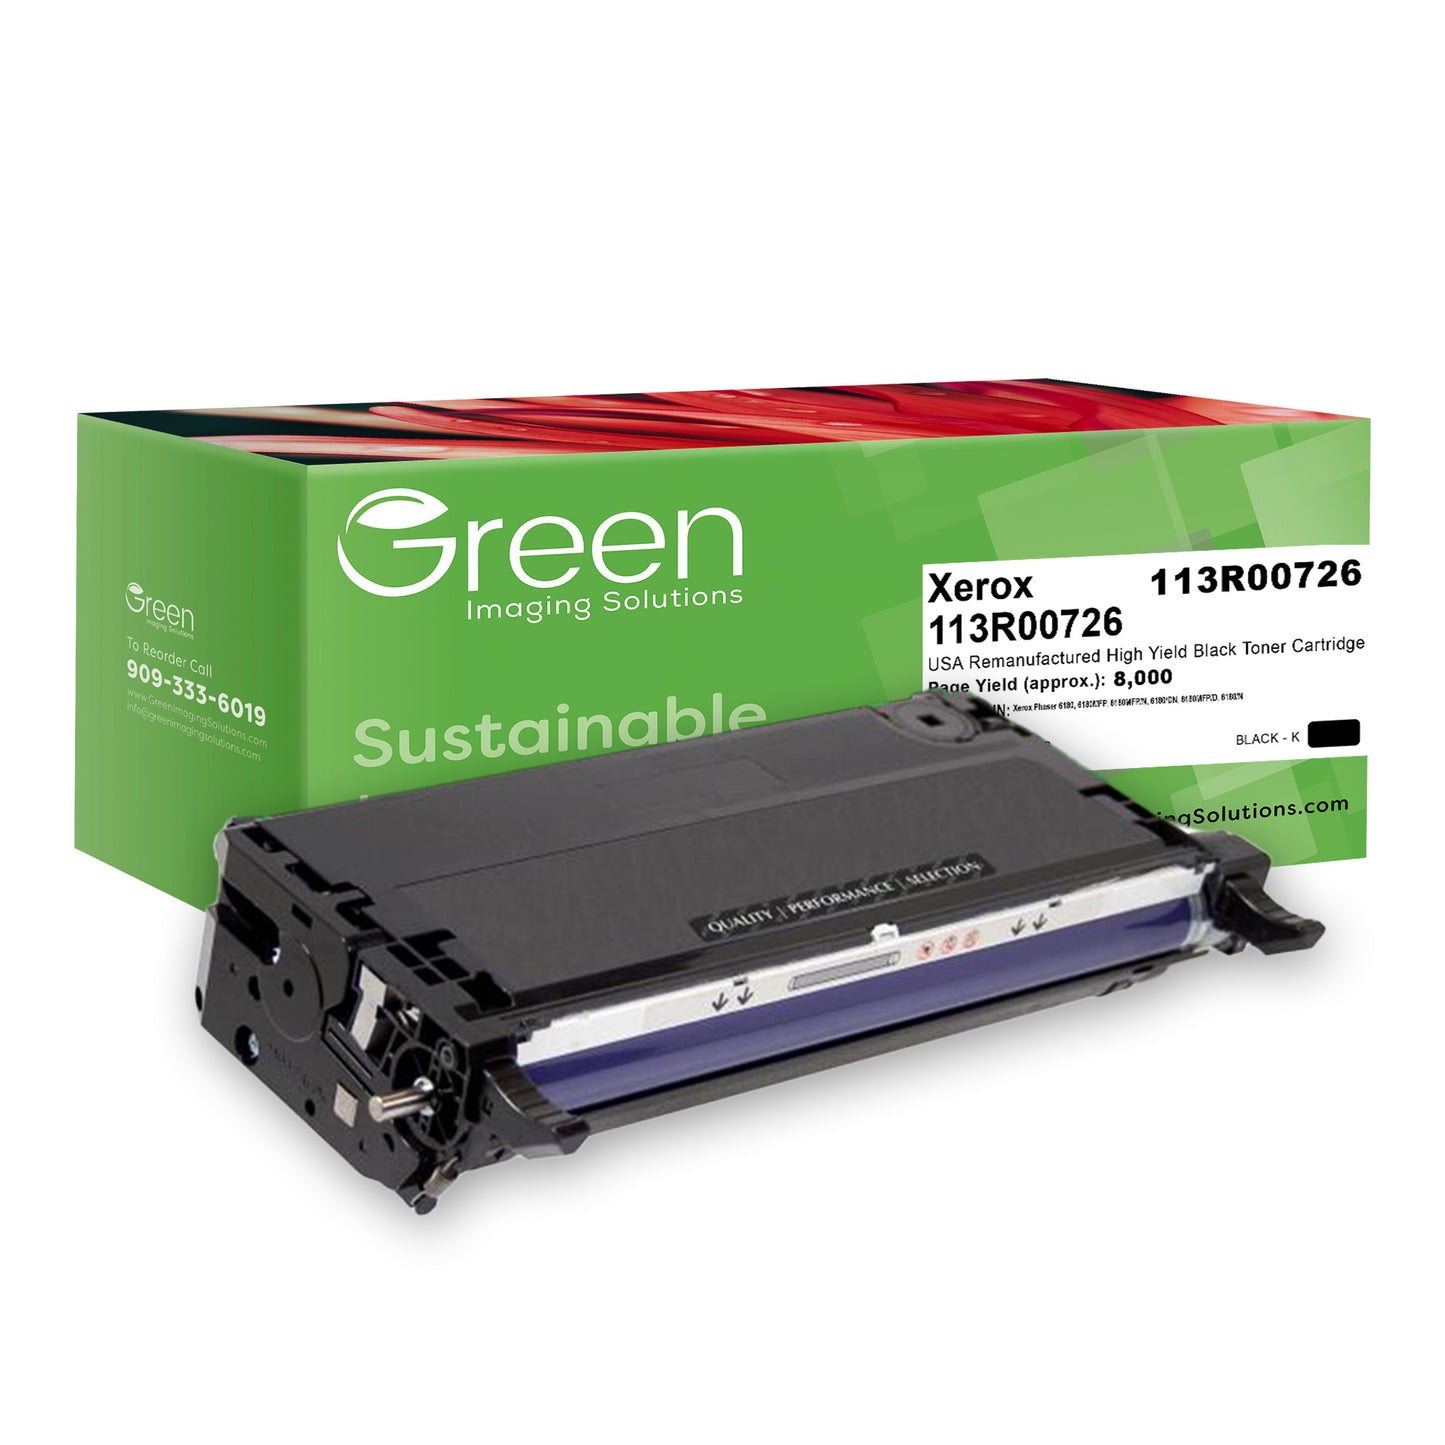 Green Imaging Solutions USA Remanufactured High Yield Black Toner Cartridge for Xerox 113R00726